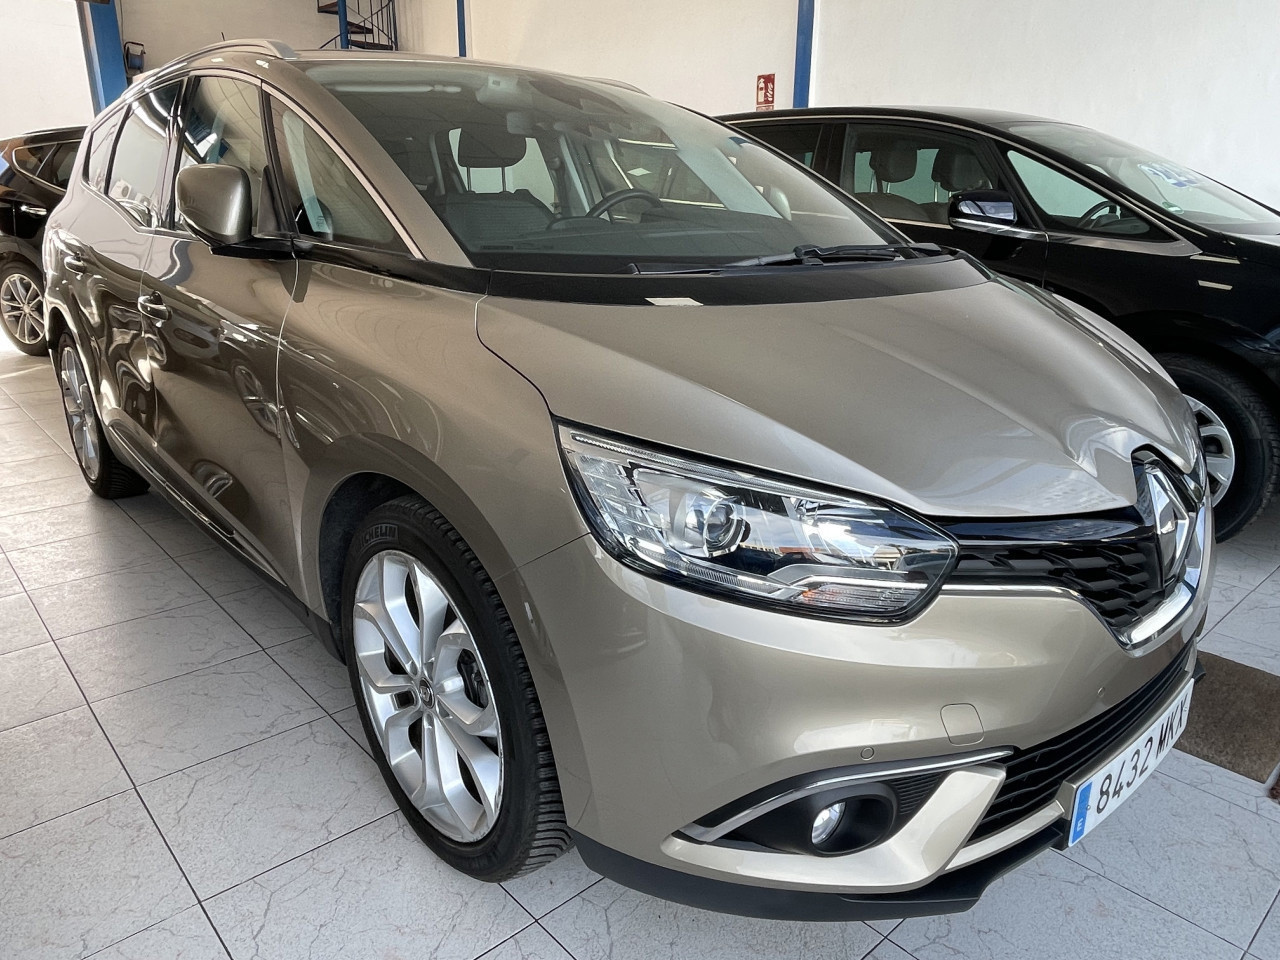 Renault Grand Scenic 1.5 Dci Automatic People carrier